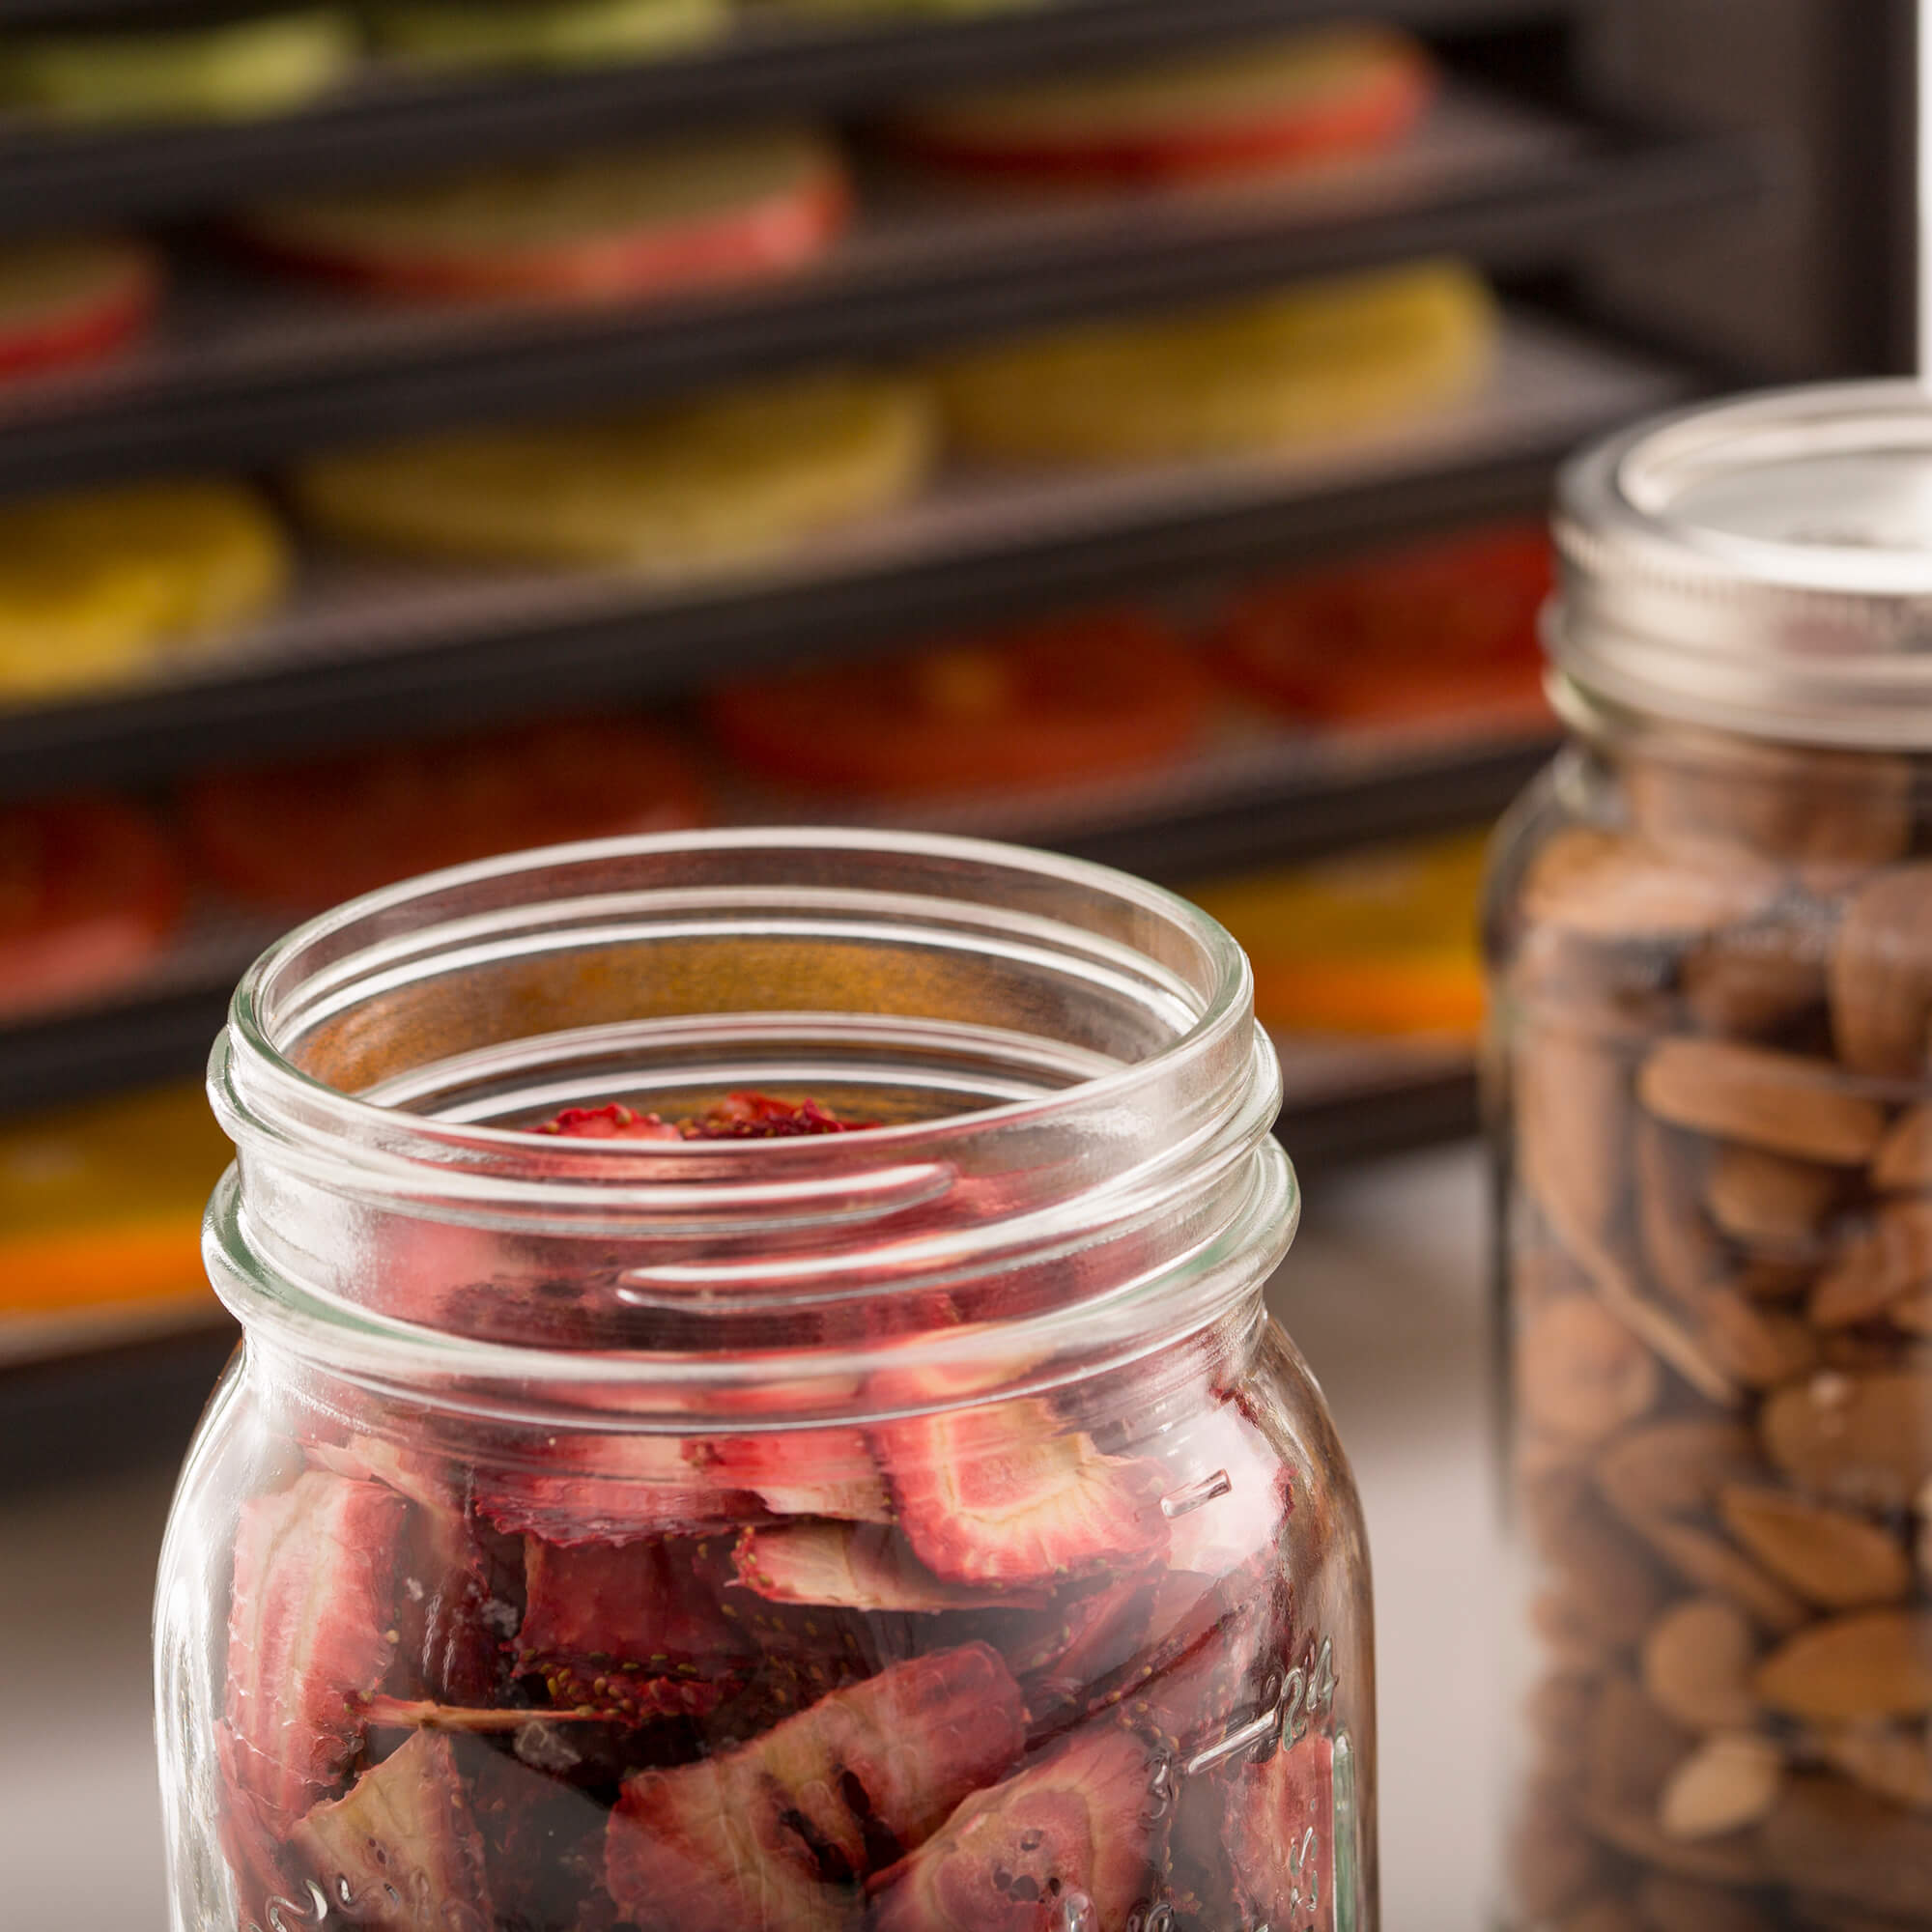 Closeup of glass jars filled with strawberries & nuts, placed in front of an Excalibur RES10 dehydrator.